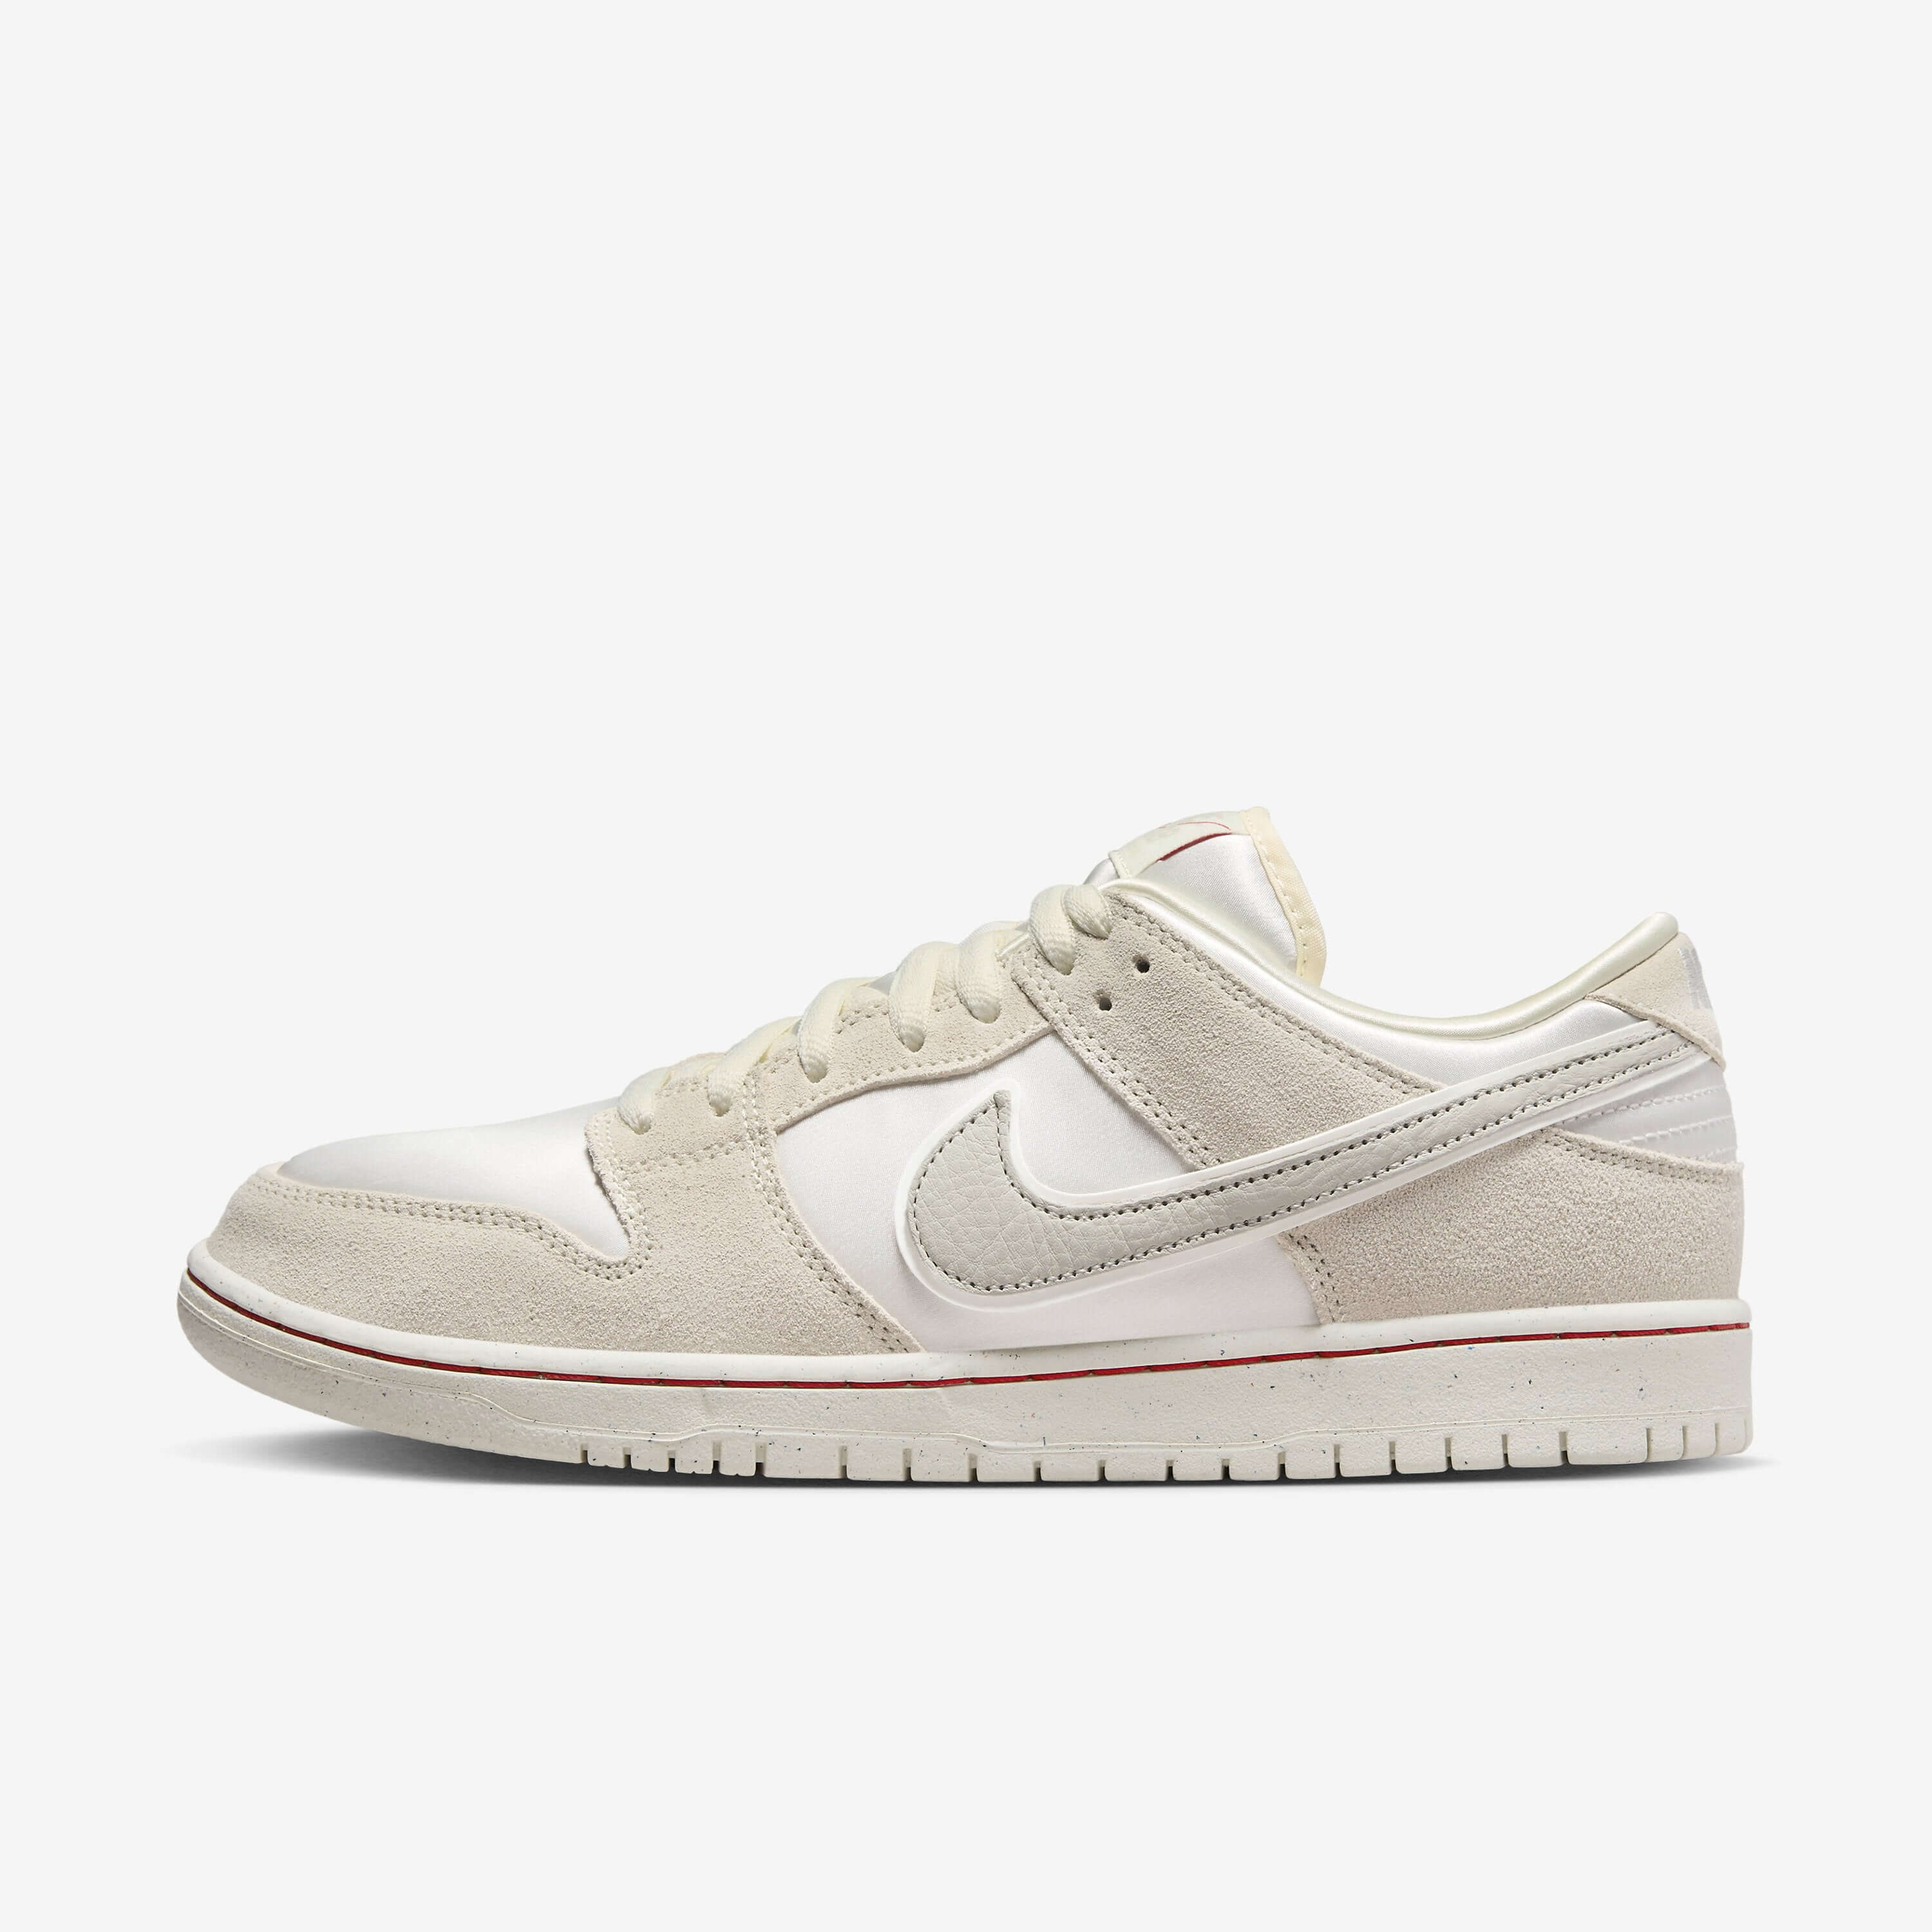 Nike SB Dunk Low ‘City of Love’ (White) | FZ5654-100 | $299.99 | $299.99 | $299.99 | Shoes | Marching Dogs